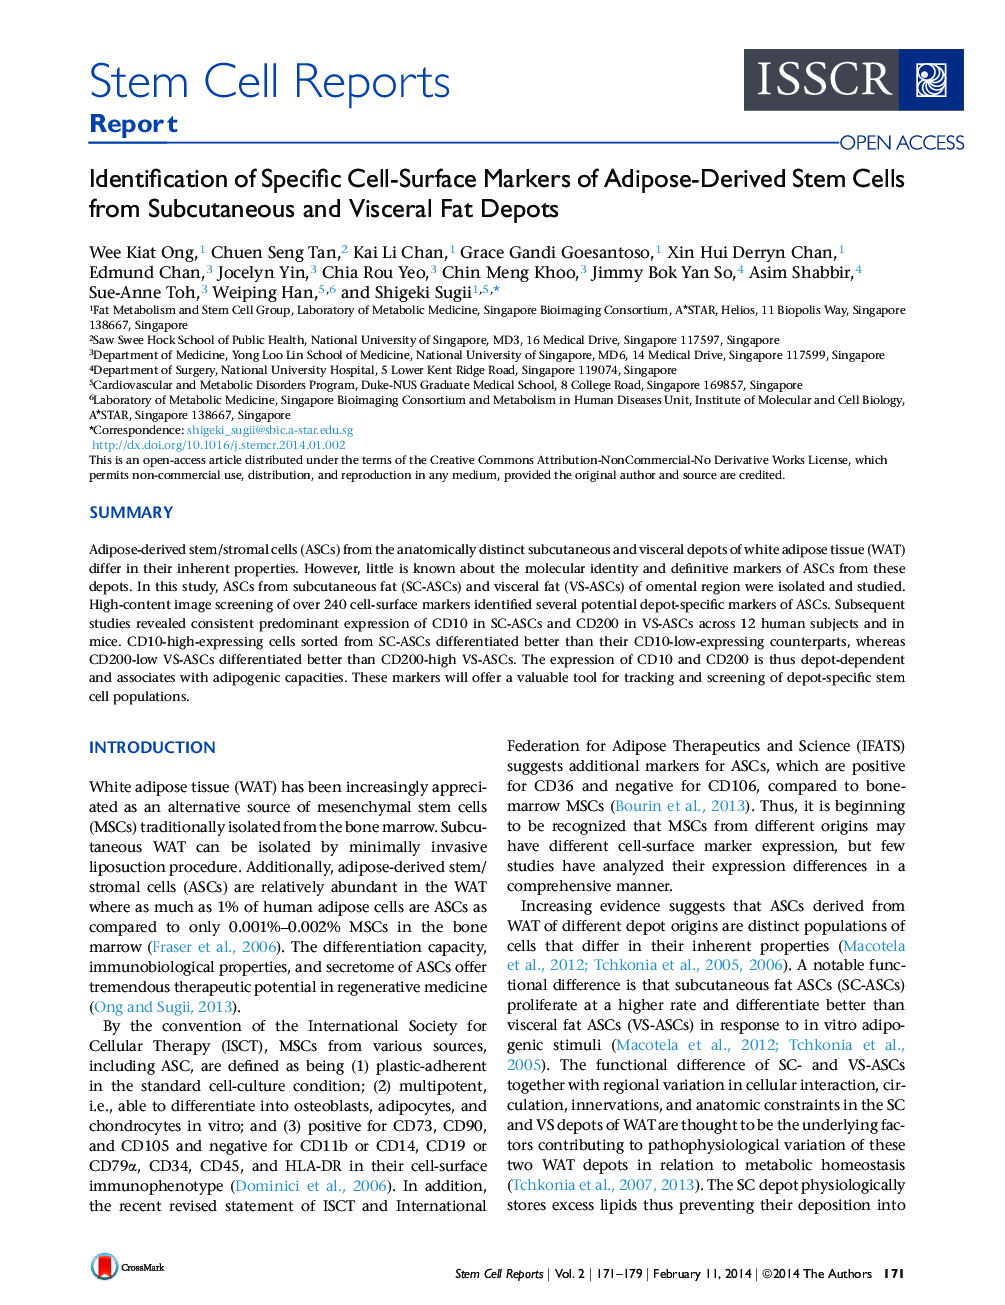 Identification of Specific Cell-Surface Markers of Adipose-Derived Stem Cells from Subcutaneous and Visceral Fat Depots 